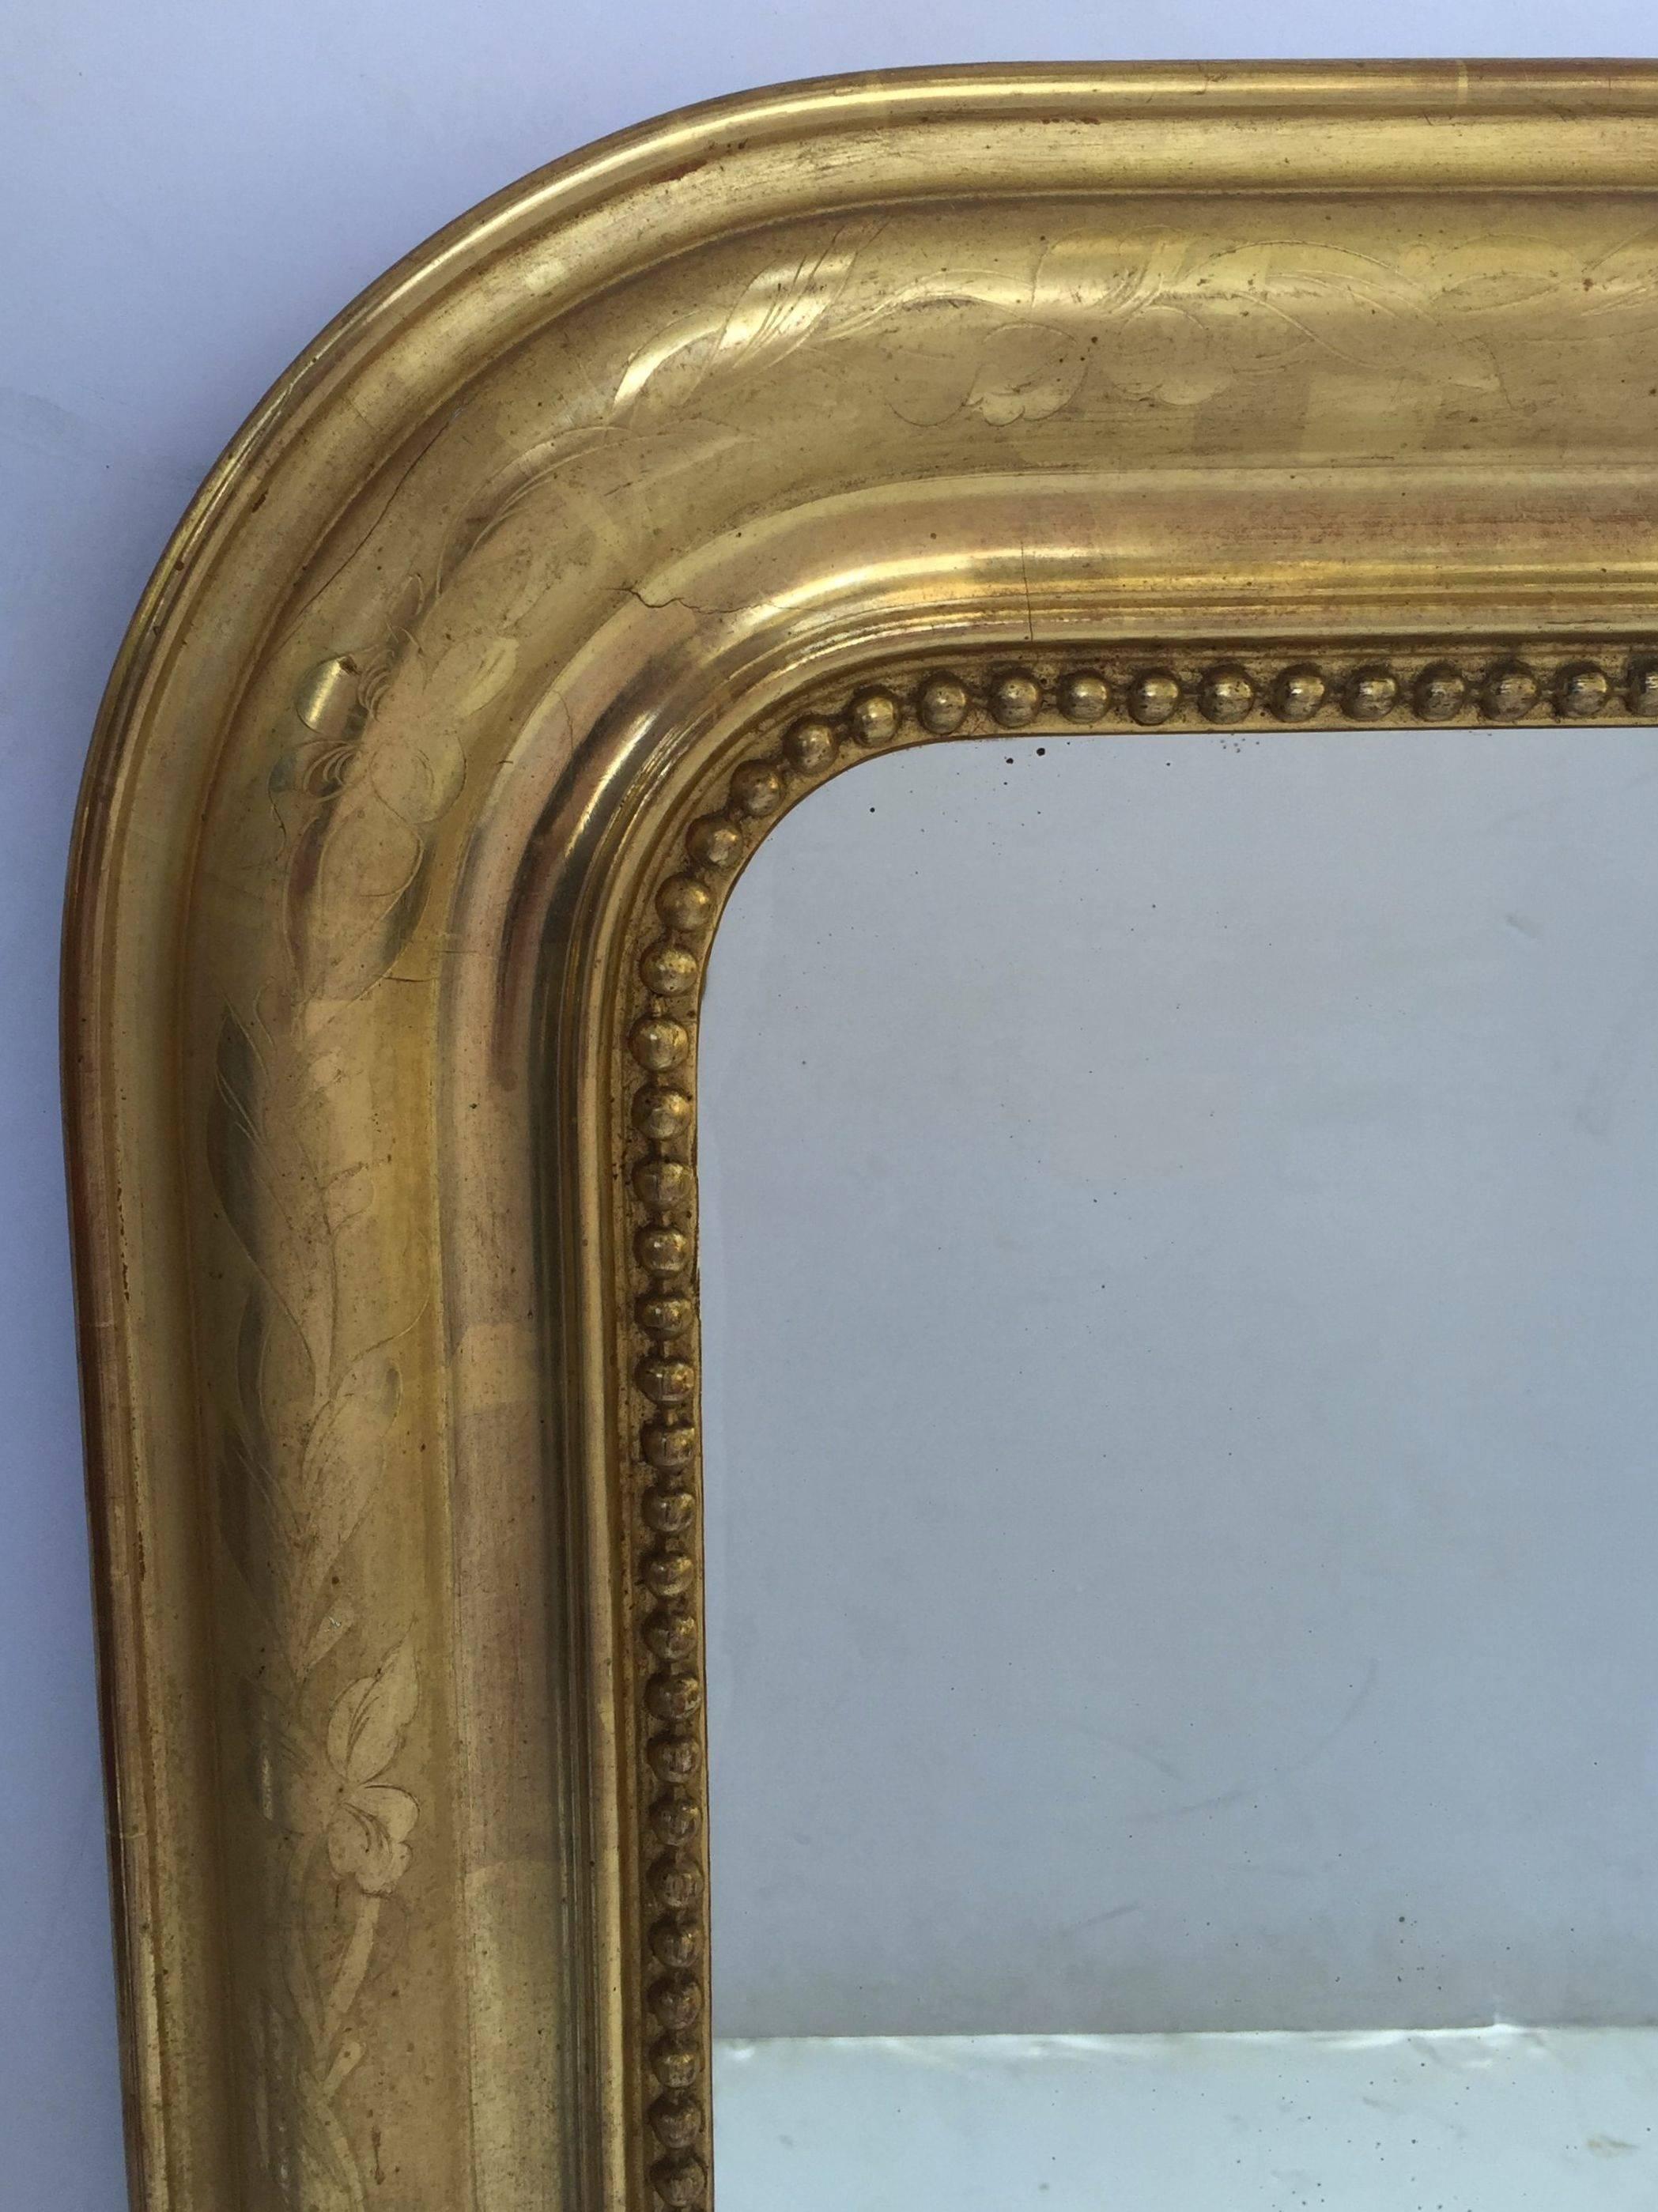 A handsome large Louis Philippe gilt wall mirror featuring a lovely moulded surround and an etched foliate design showing through gold-leaf.

Dimensions: H 35 1/2